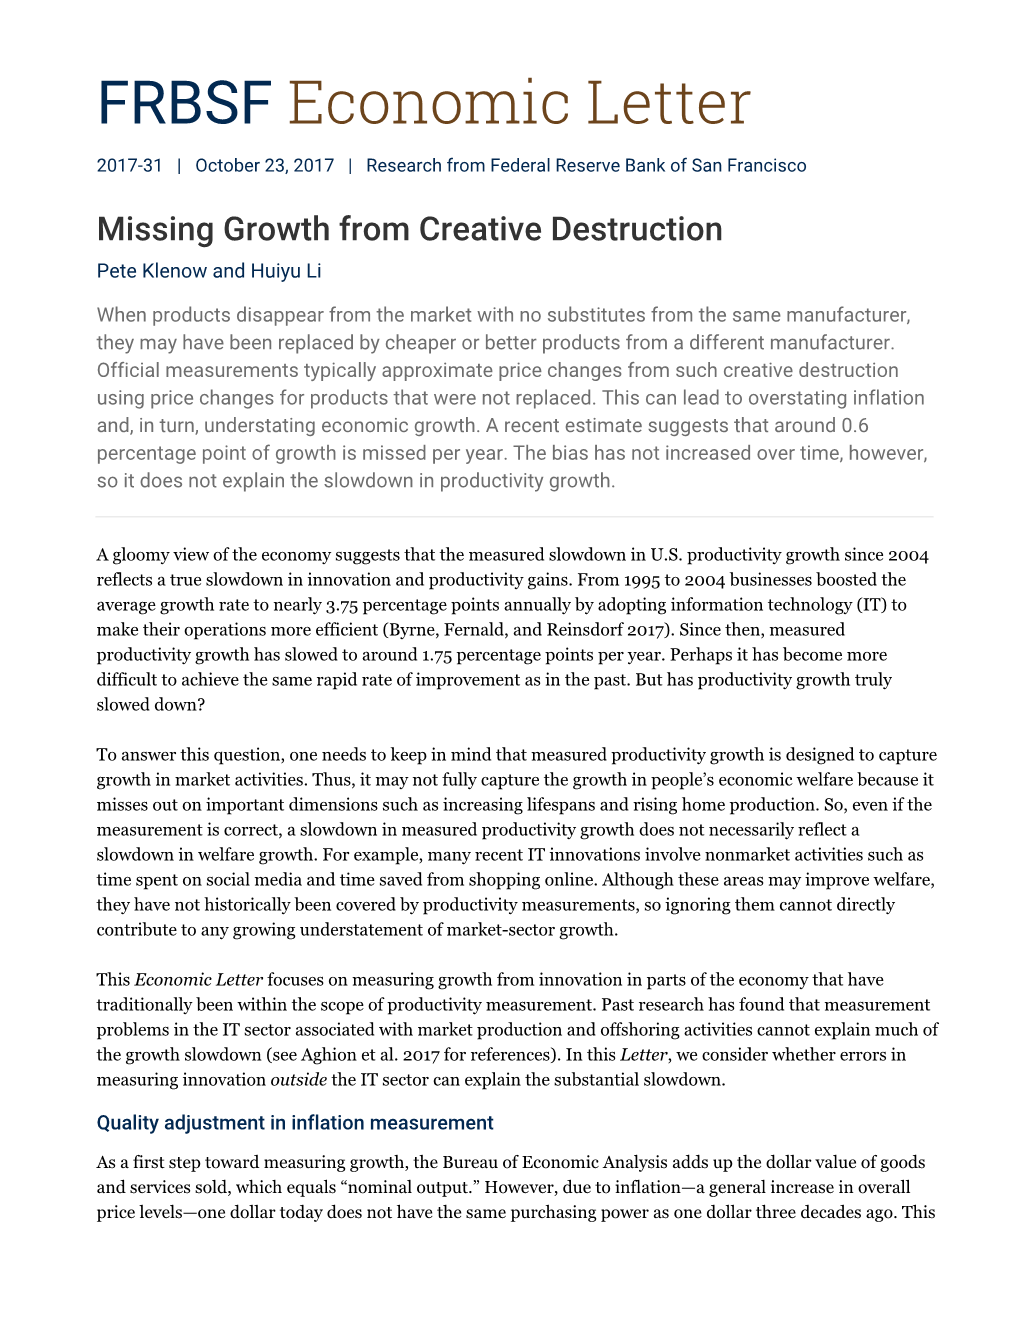 Missing Growth from Creative Destruction Pete Klenow and Huiyu Li